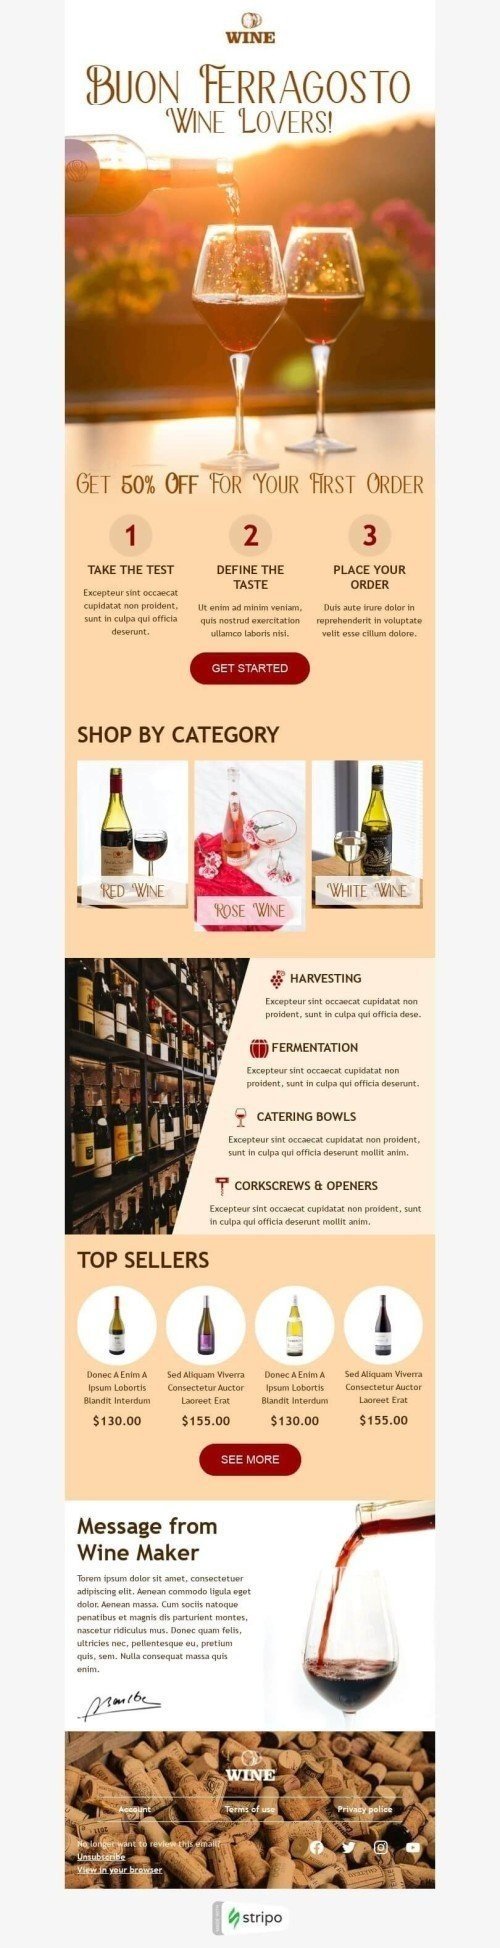 Ferragosto Email Template «Message from Wine Maker» for Beverages industry desktop view